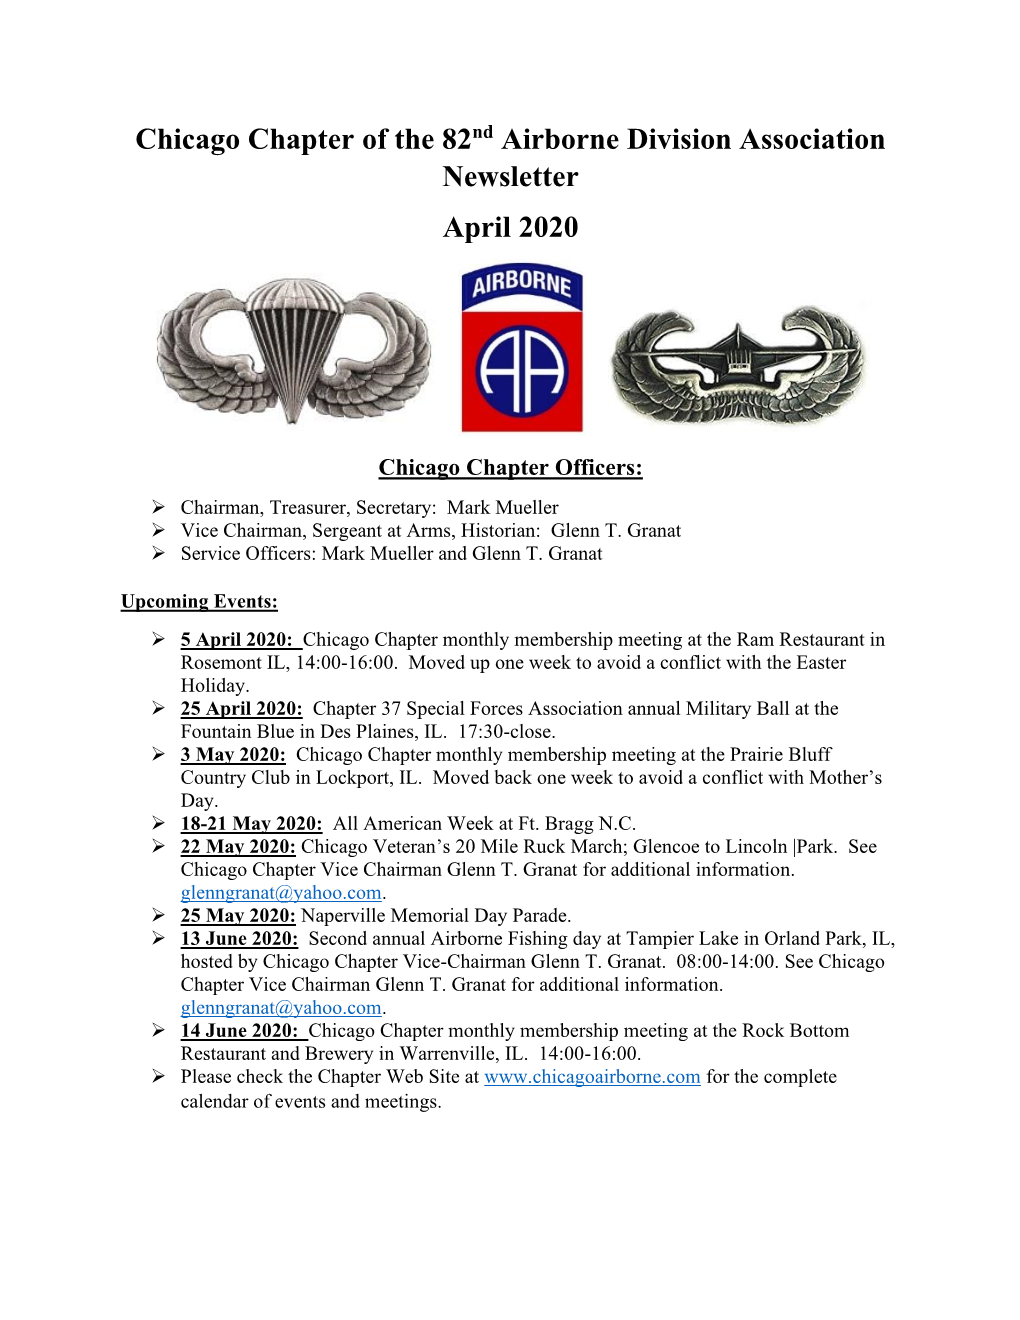 Chicago Chapter of the 82Nd Airborne Division Association Newsletter April 2020